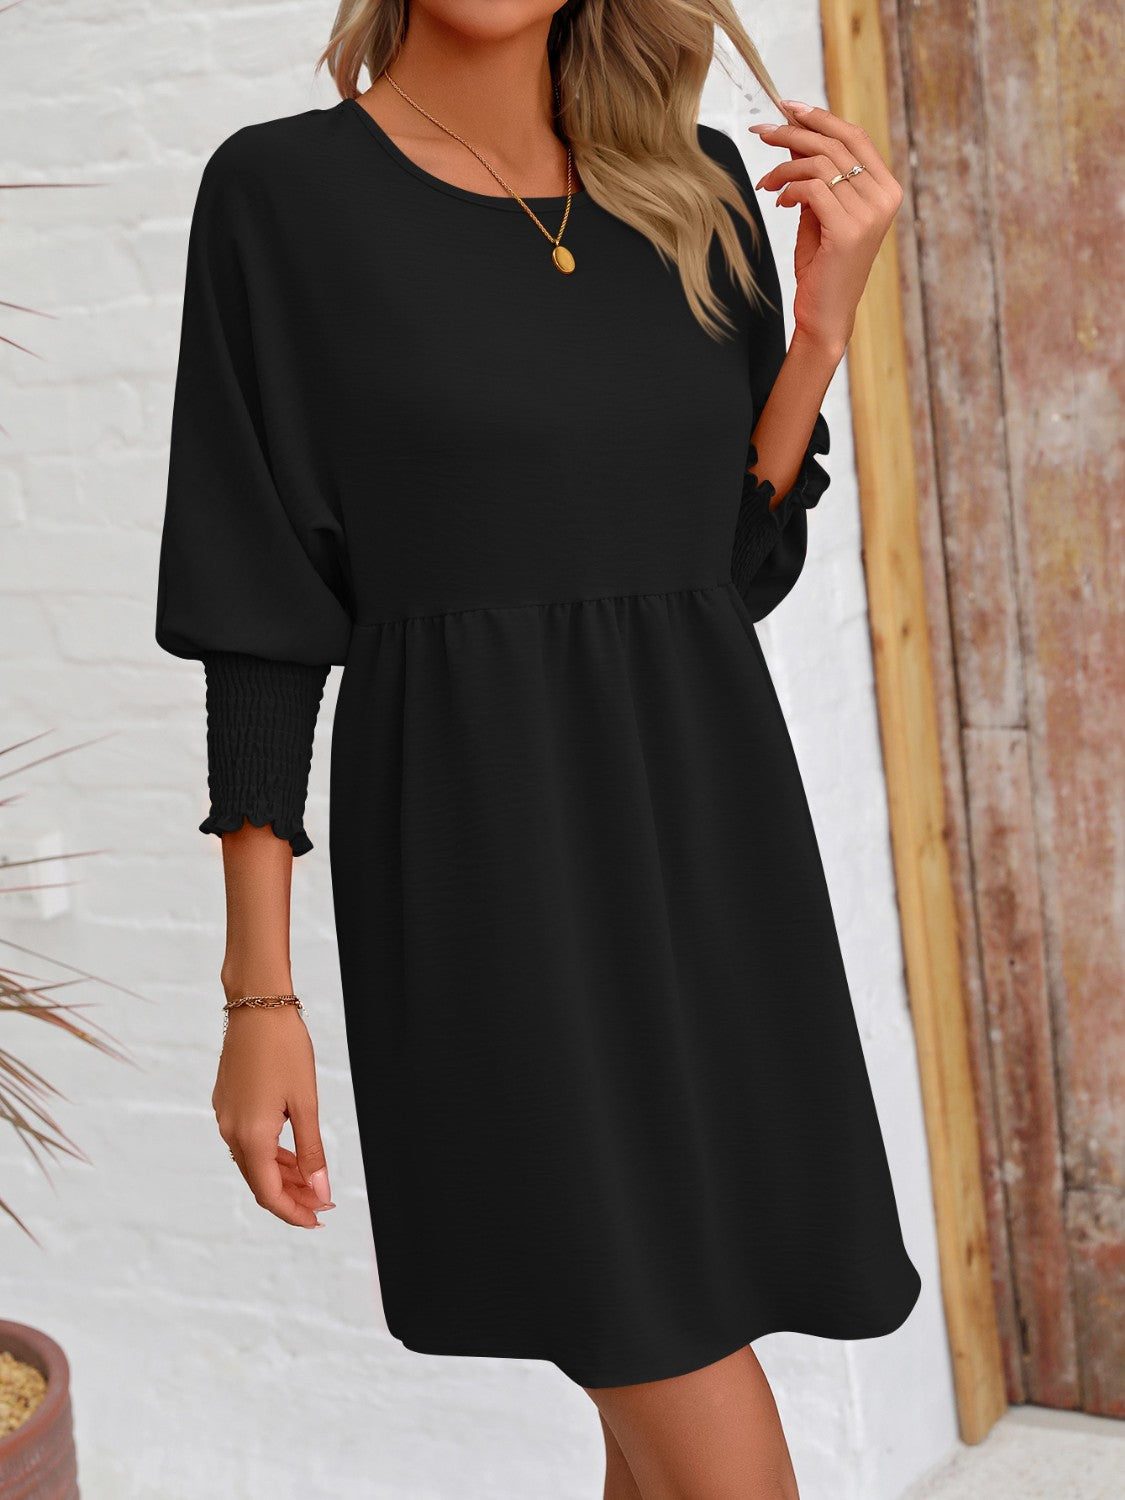 Chic Round Neck Lantern Sleeve Mini Dress for a stylish look. Perfect for any occasion, easy to style, and comfortable all day long